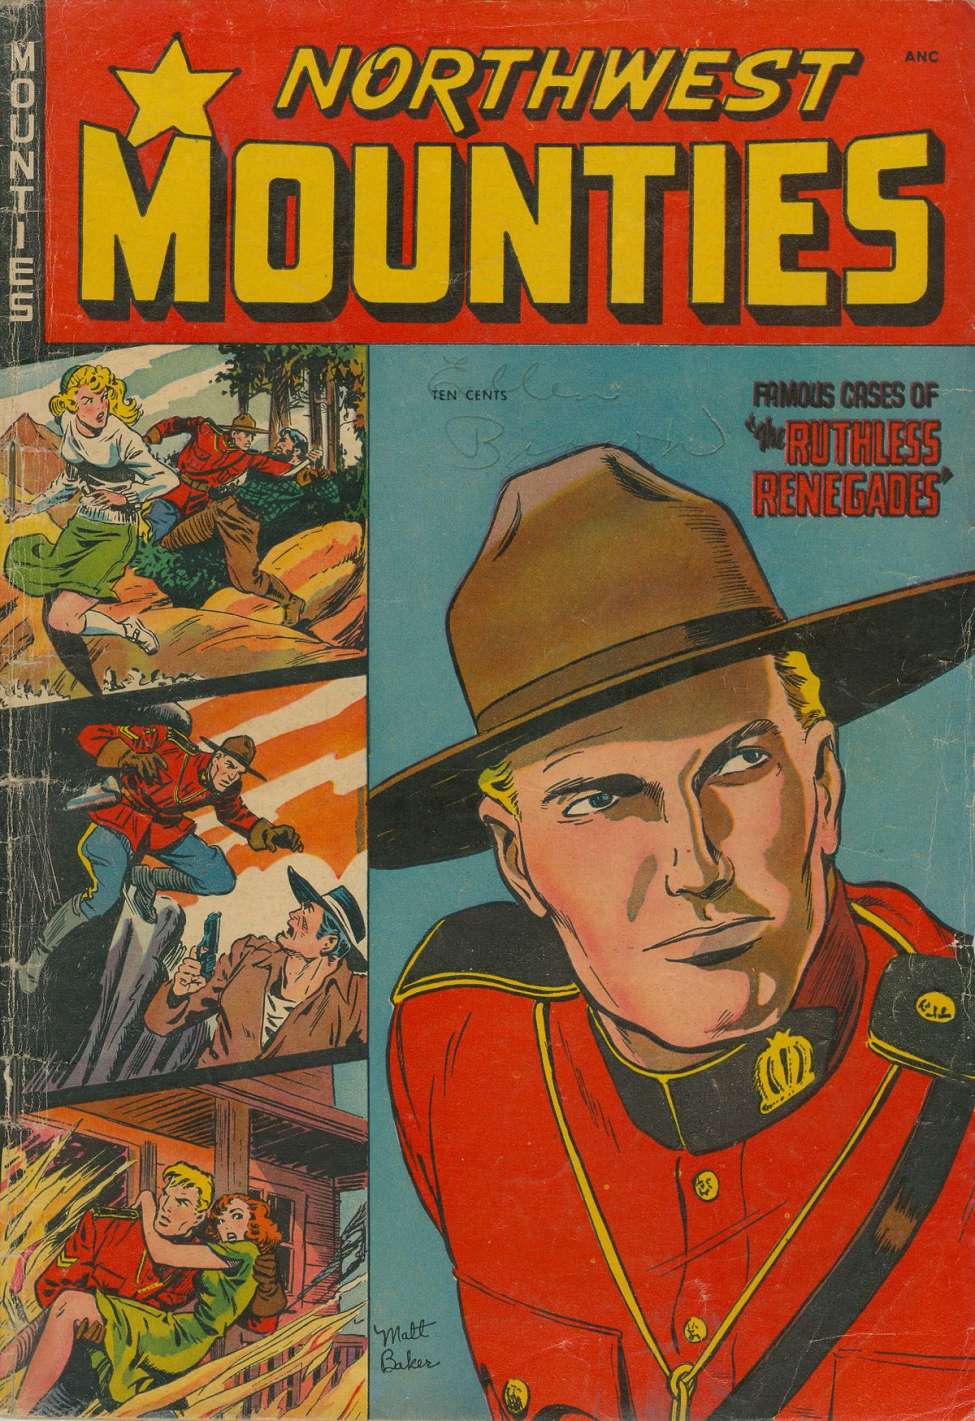 Book Cover For Northwest Mounties 4 - Version 1